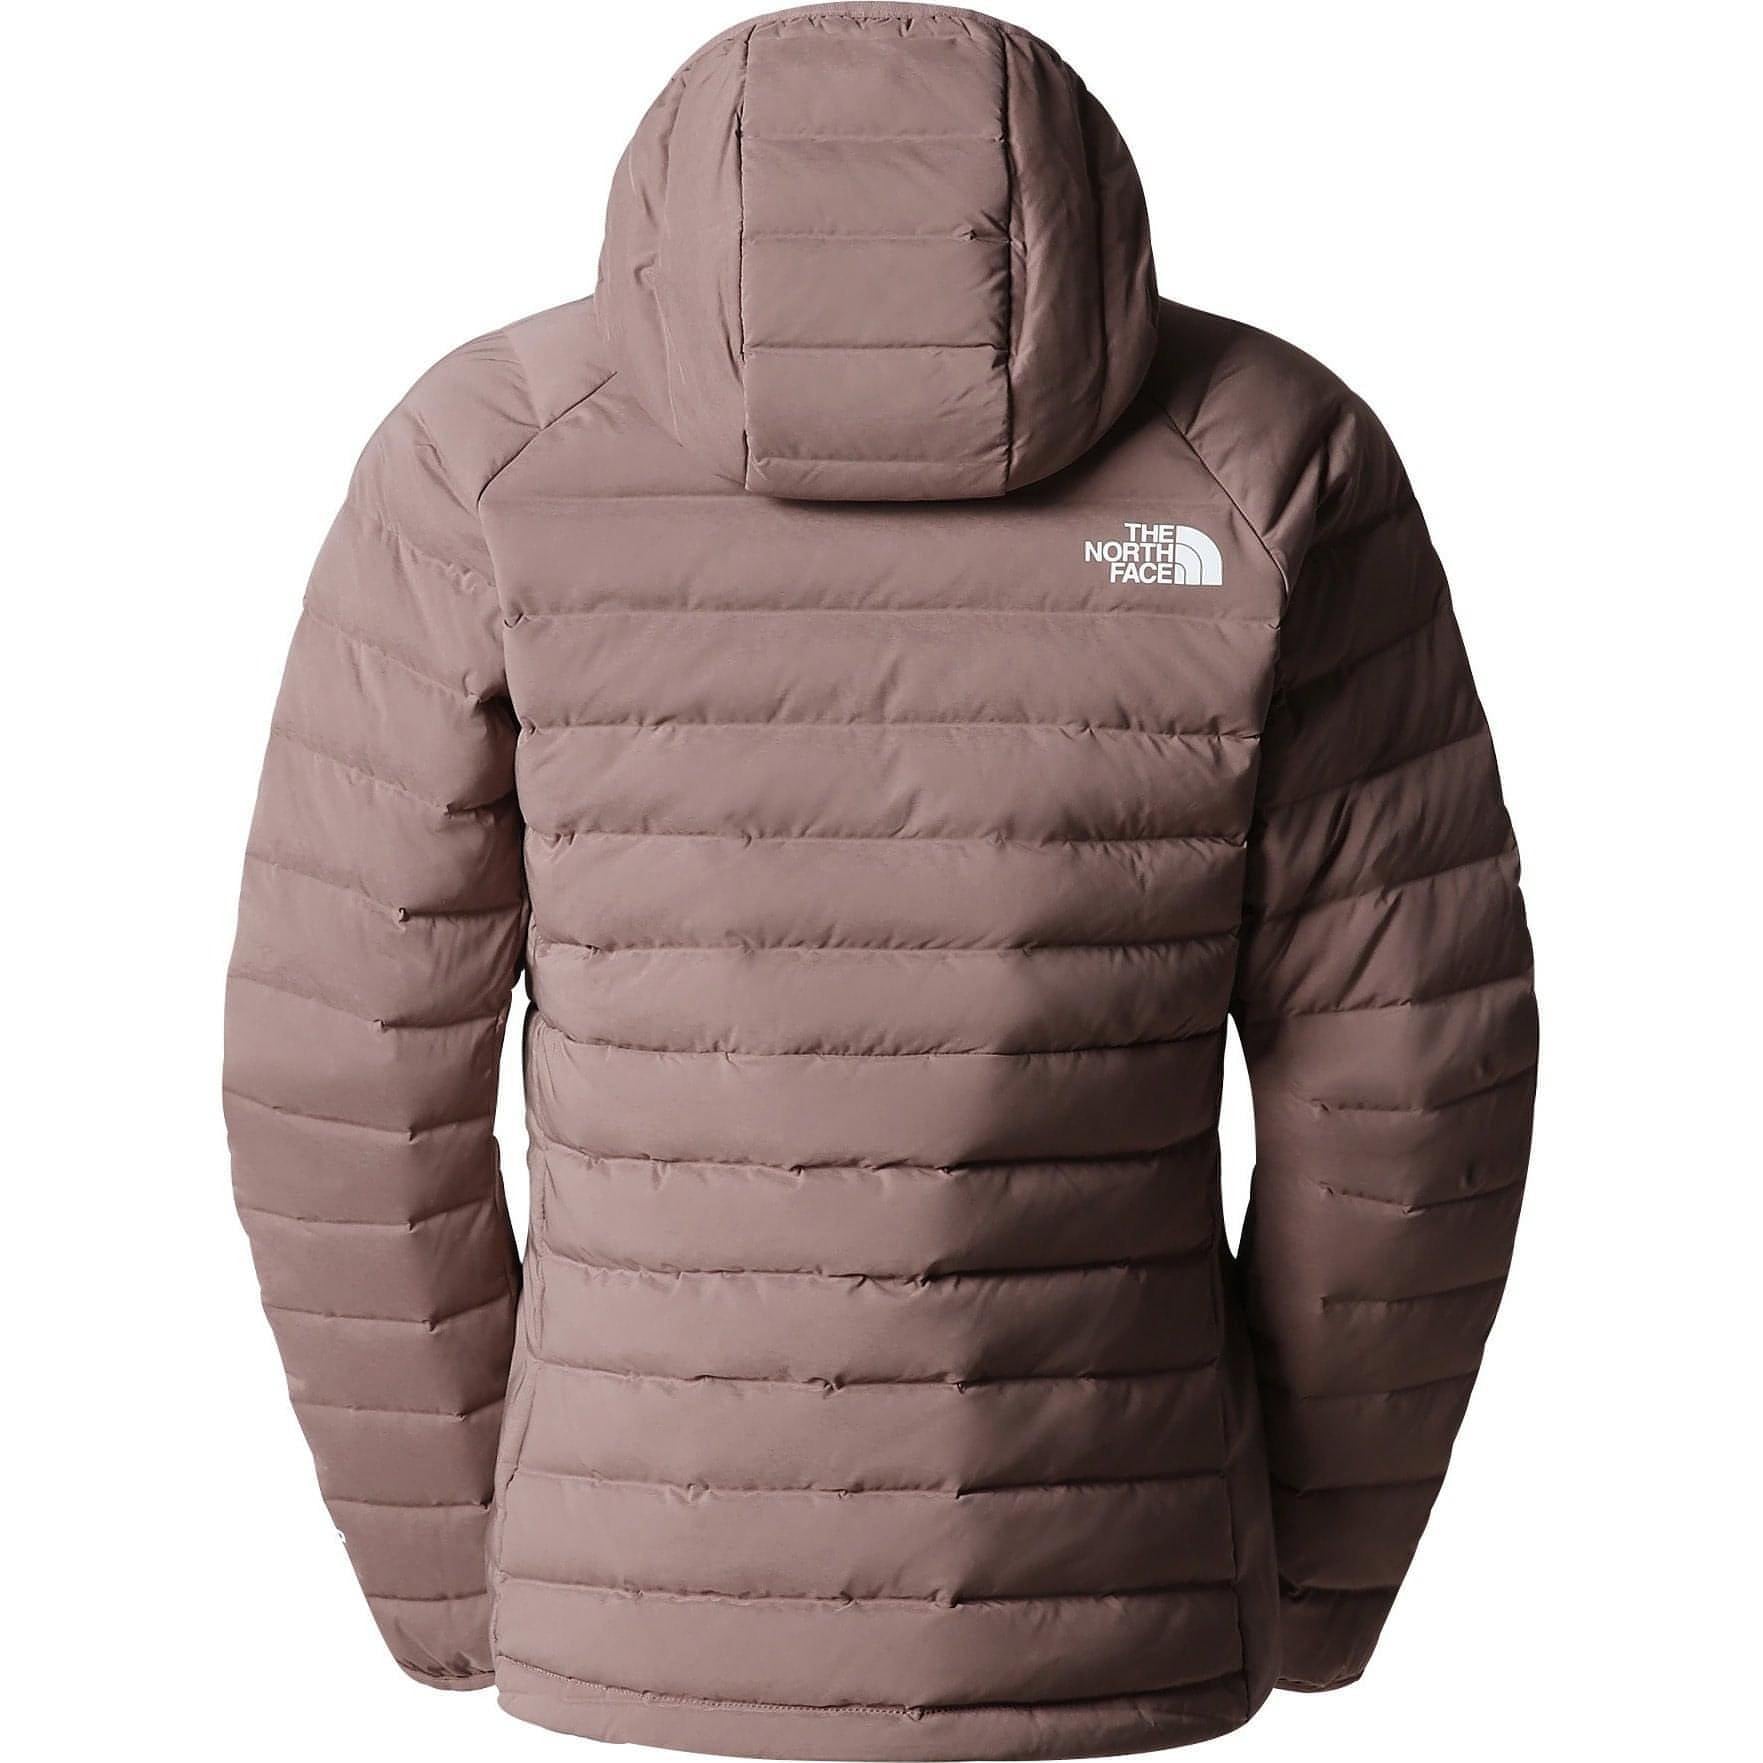 The North Face Belleview Stretch Down Jacket Nf0A7Uk5Efu1 Back2